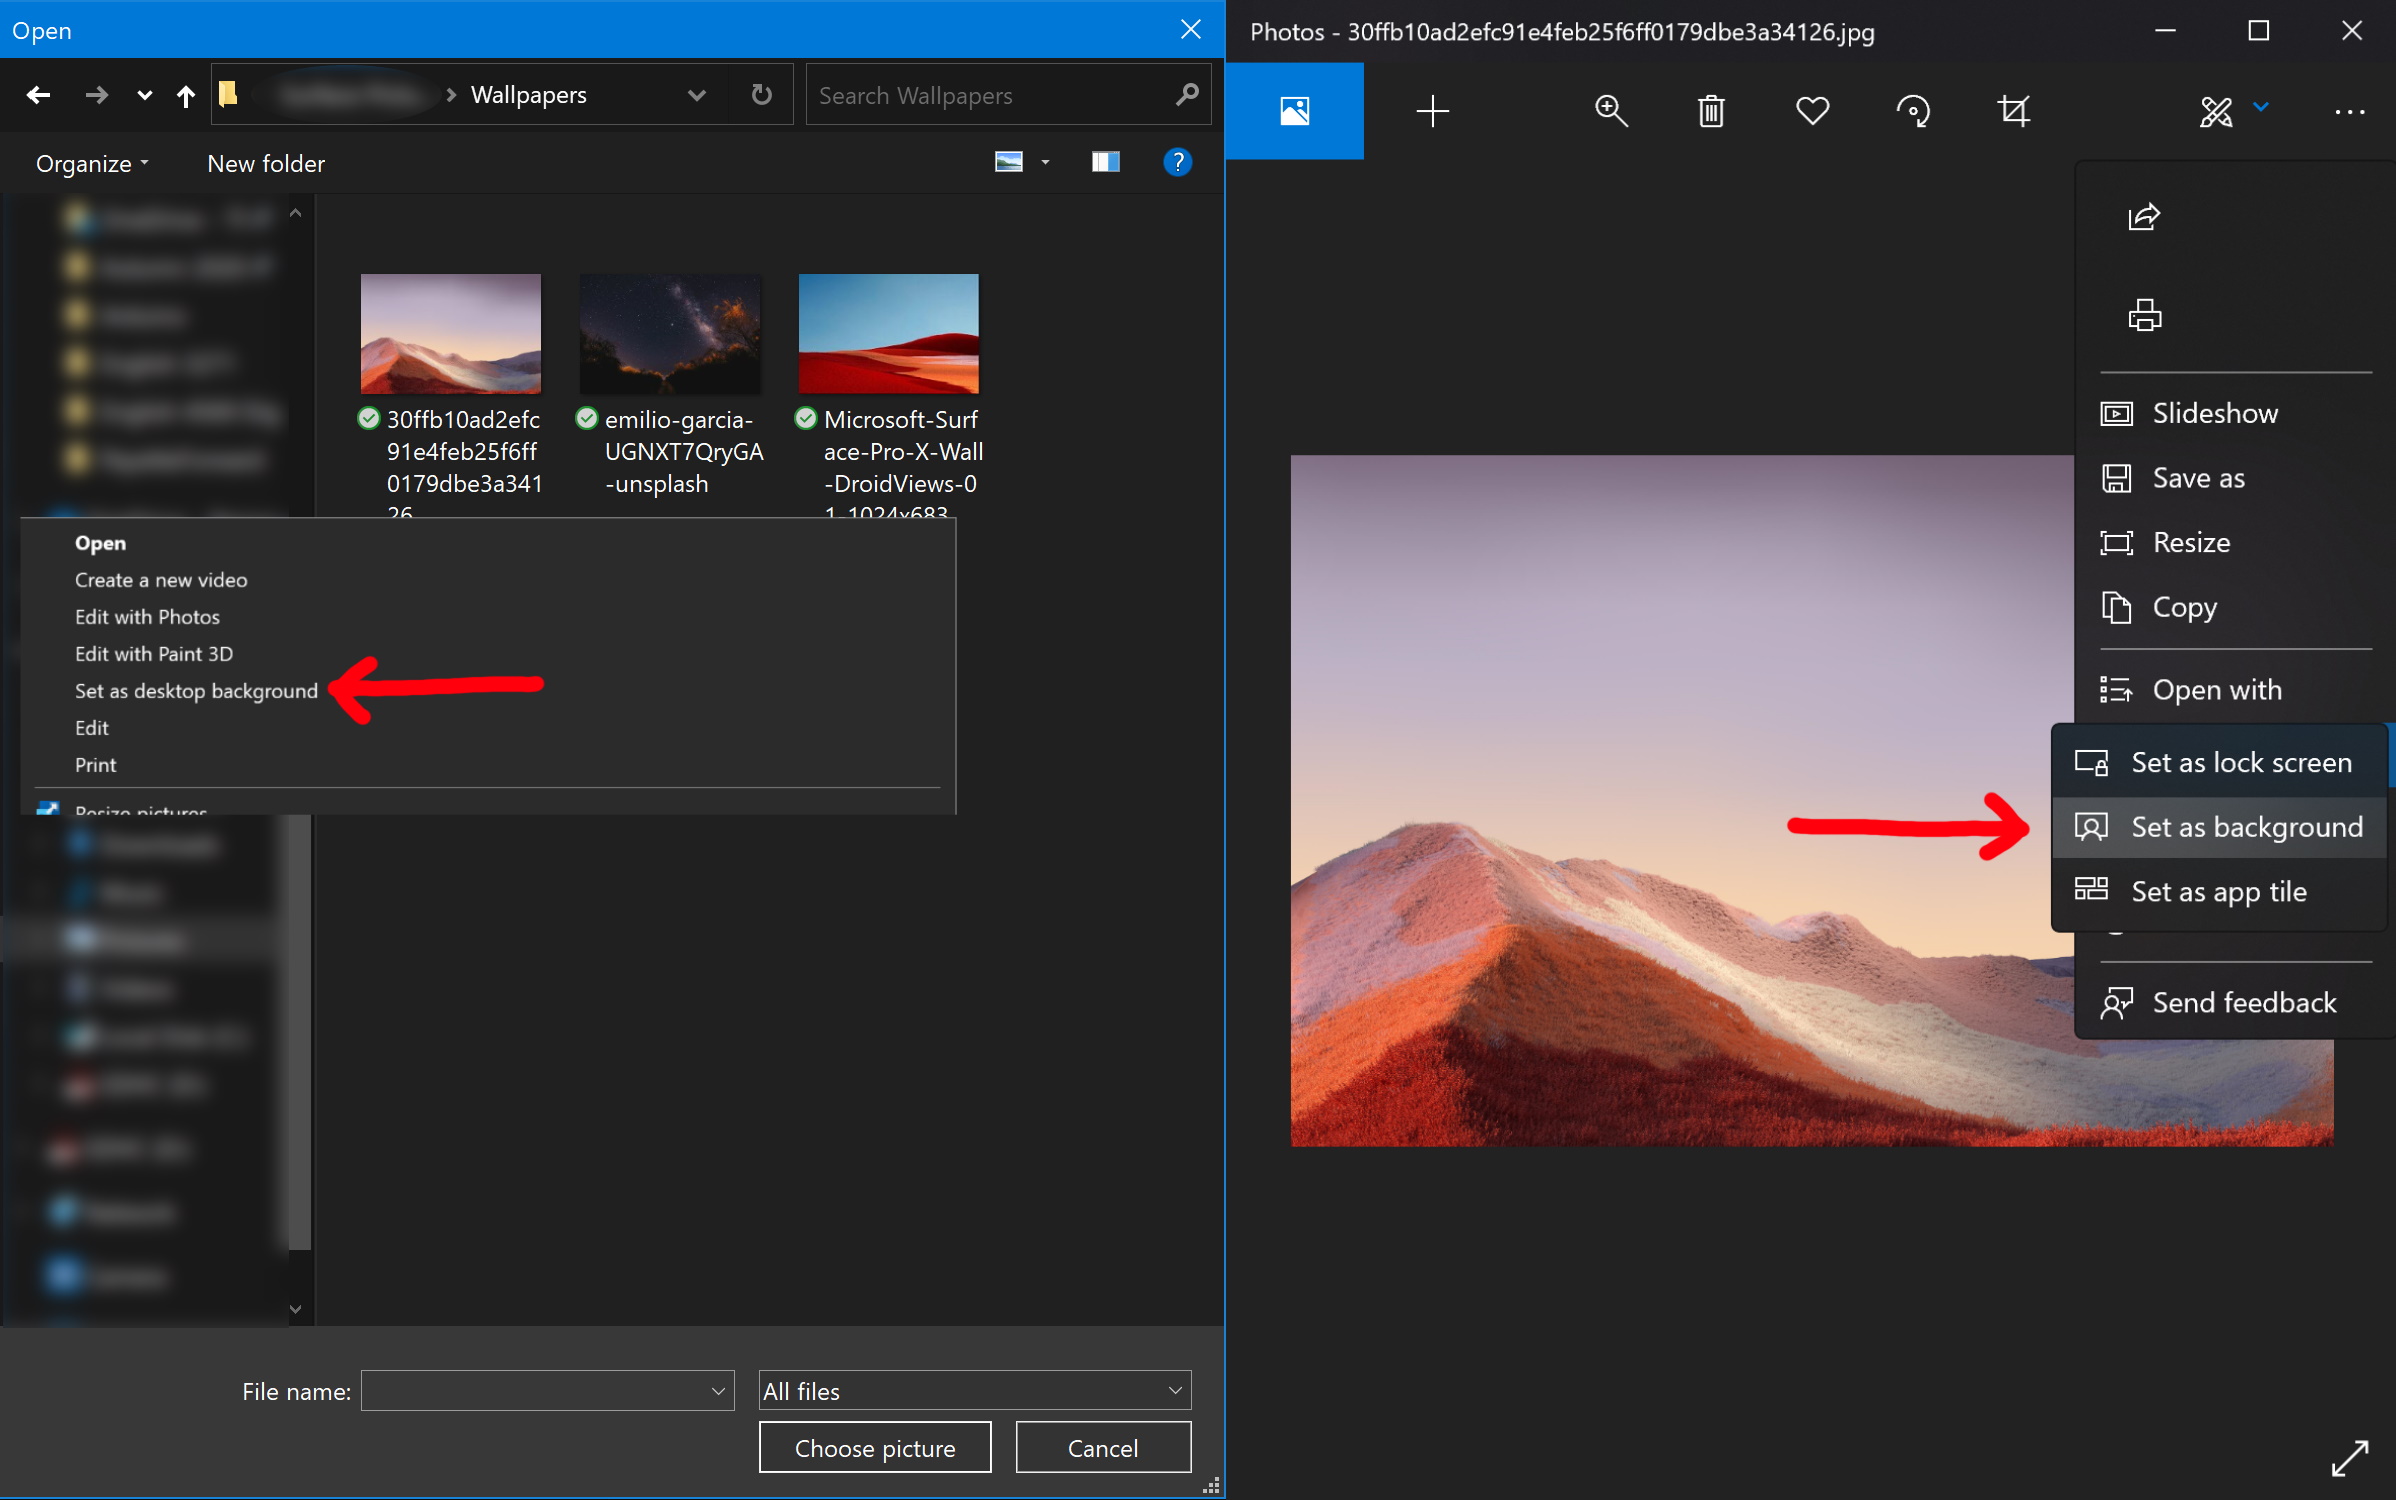 how to set background in file explorer and photos app